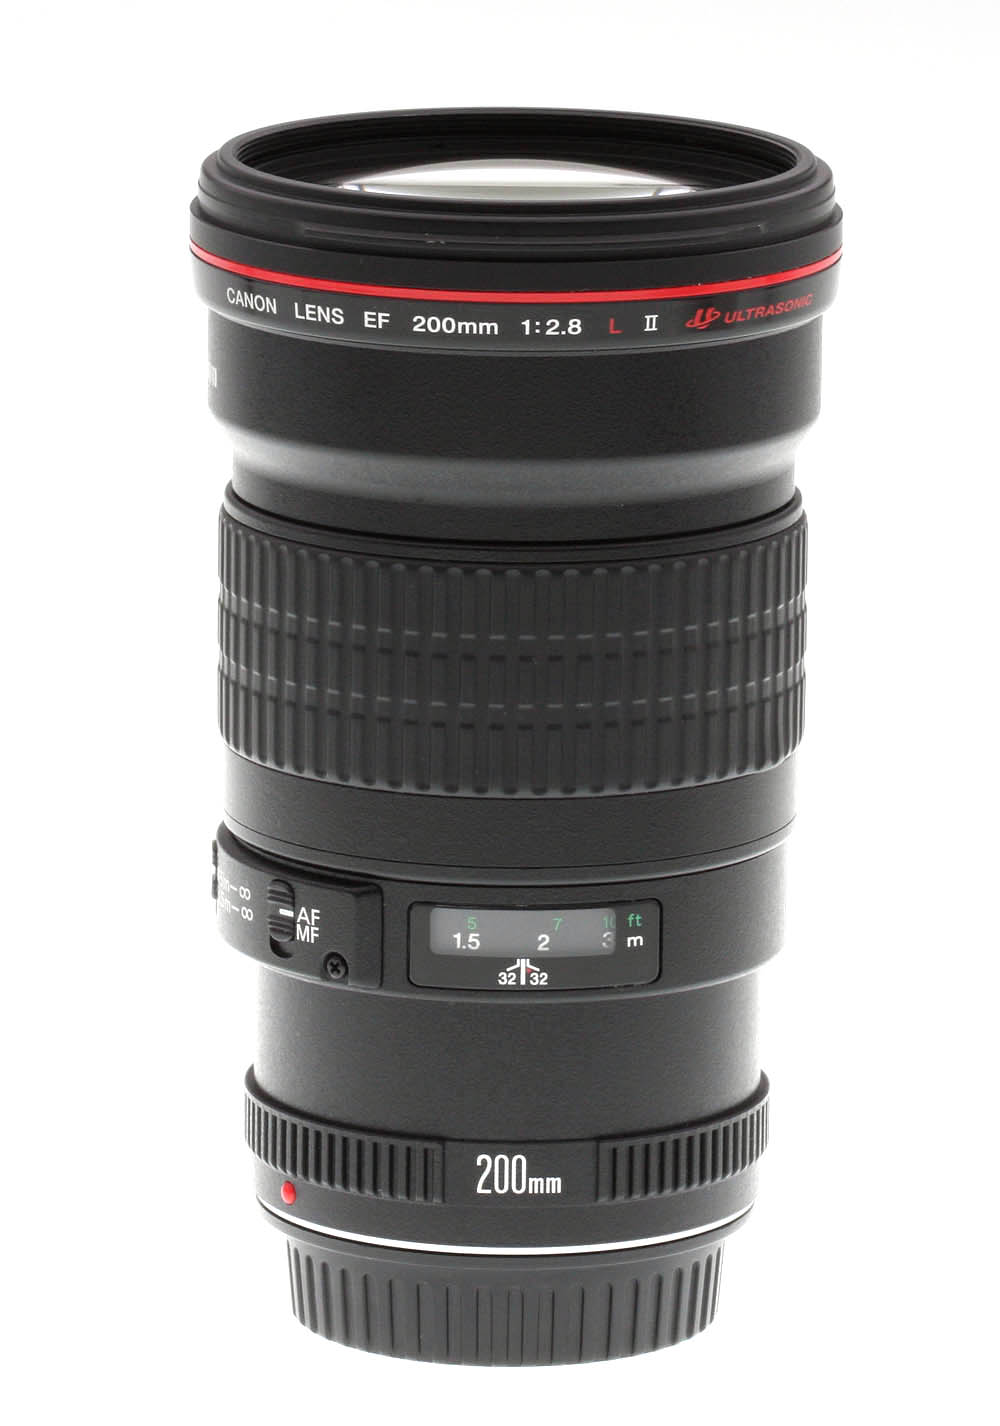 Canon EF 200mm f/2.8L II USM Review